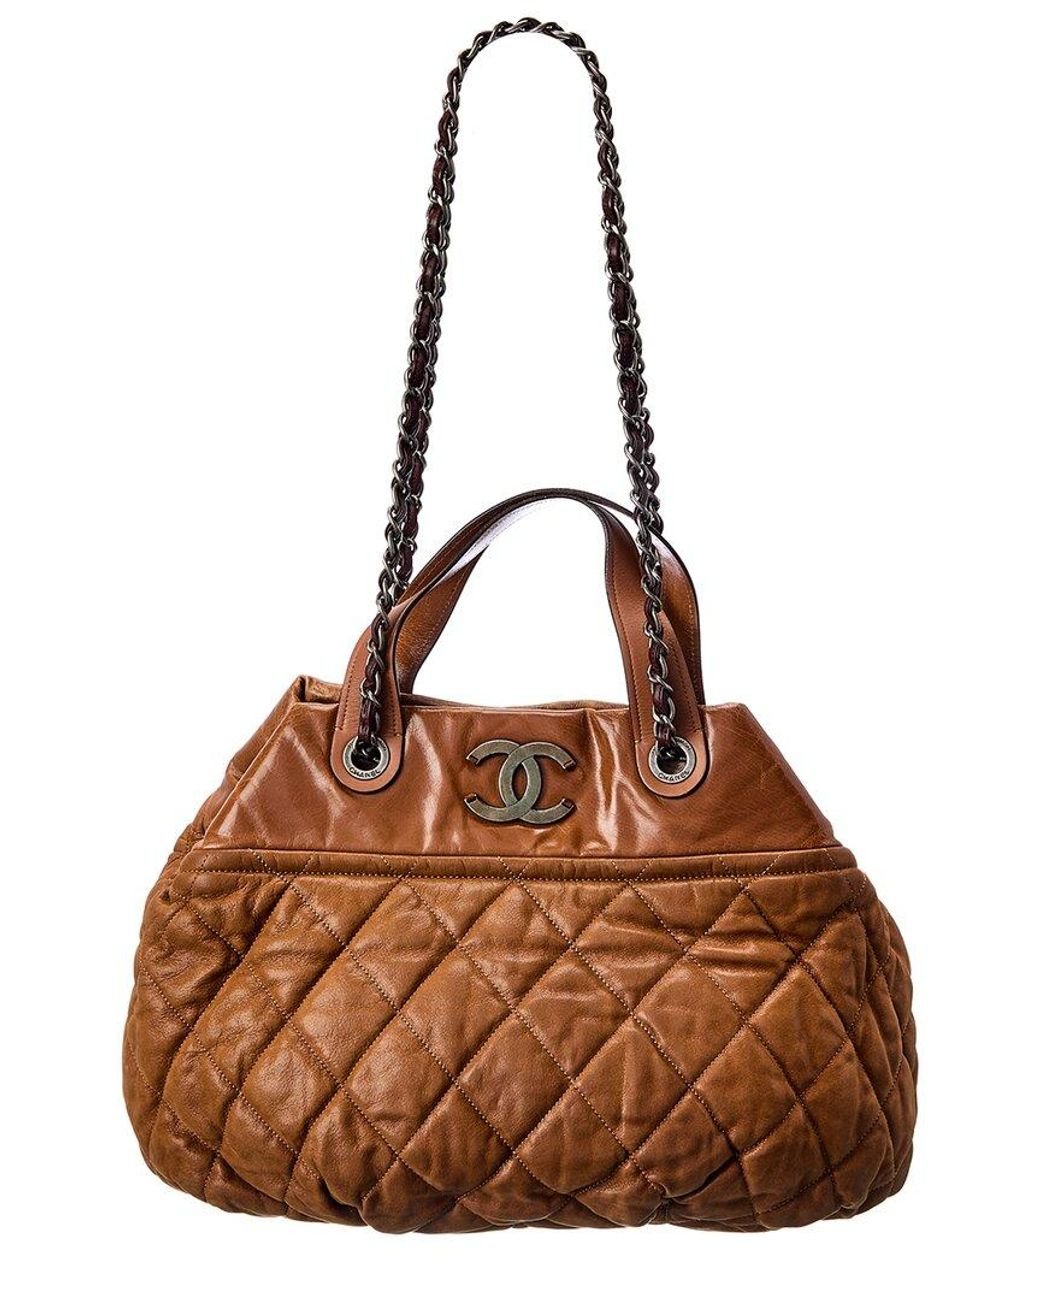 Chanel pre-owned cc classic - Gem